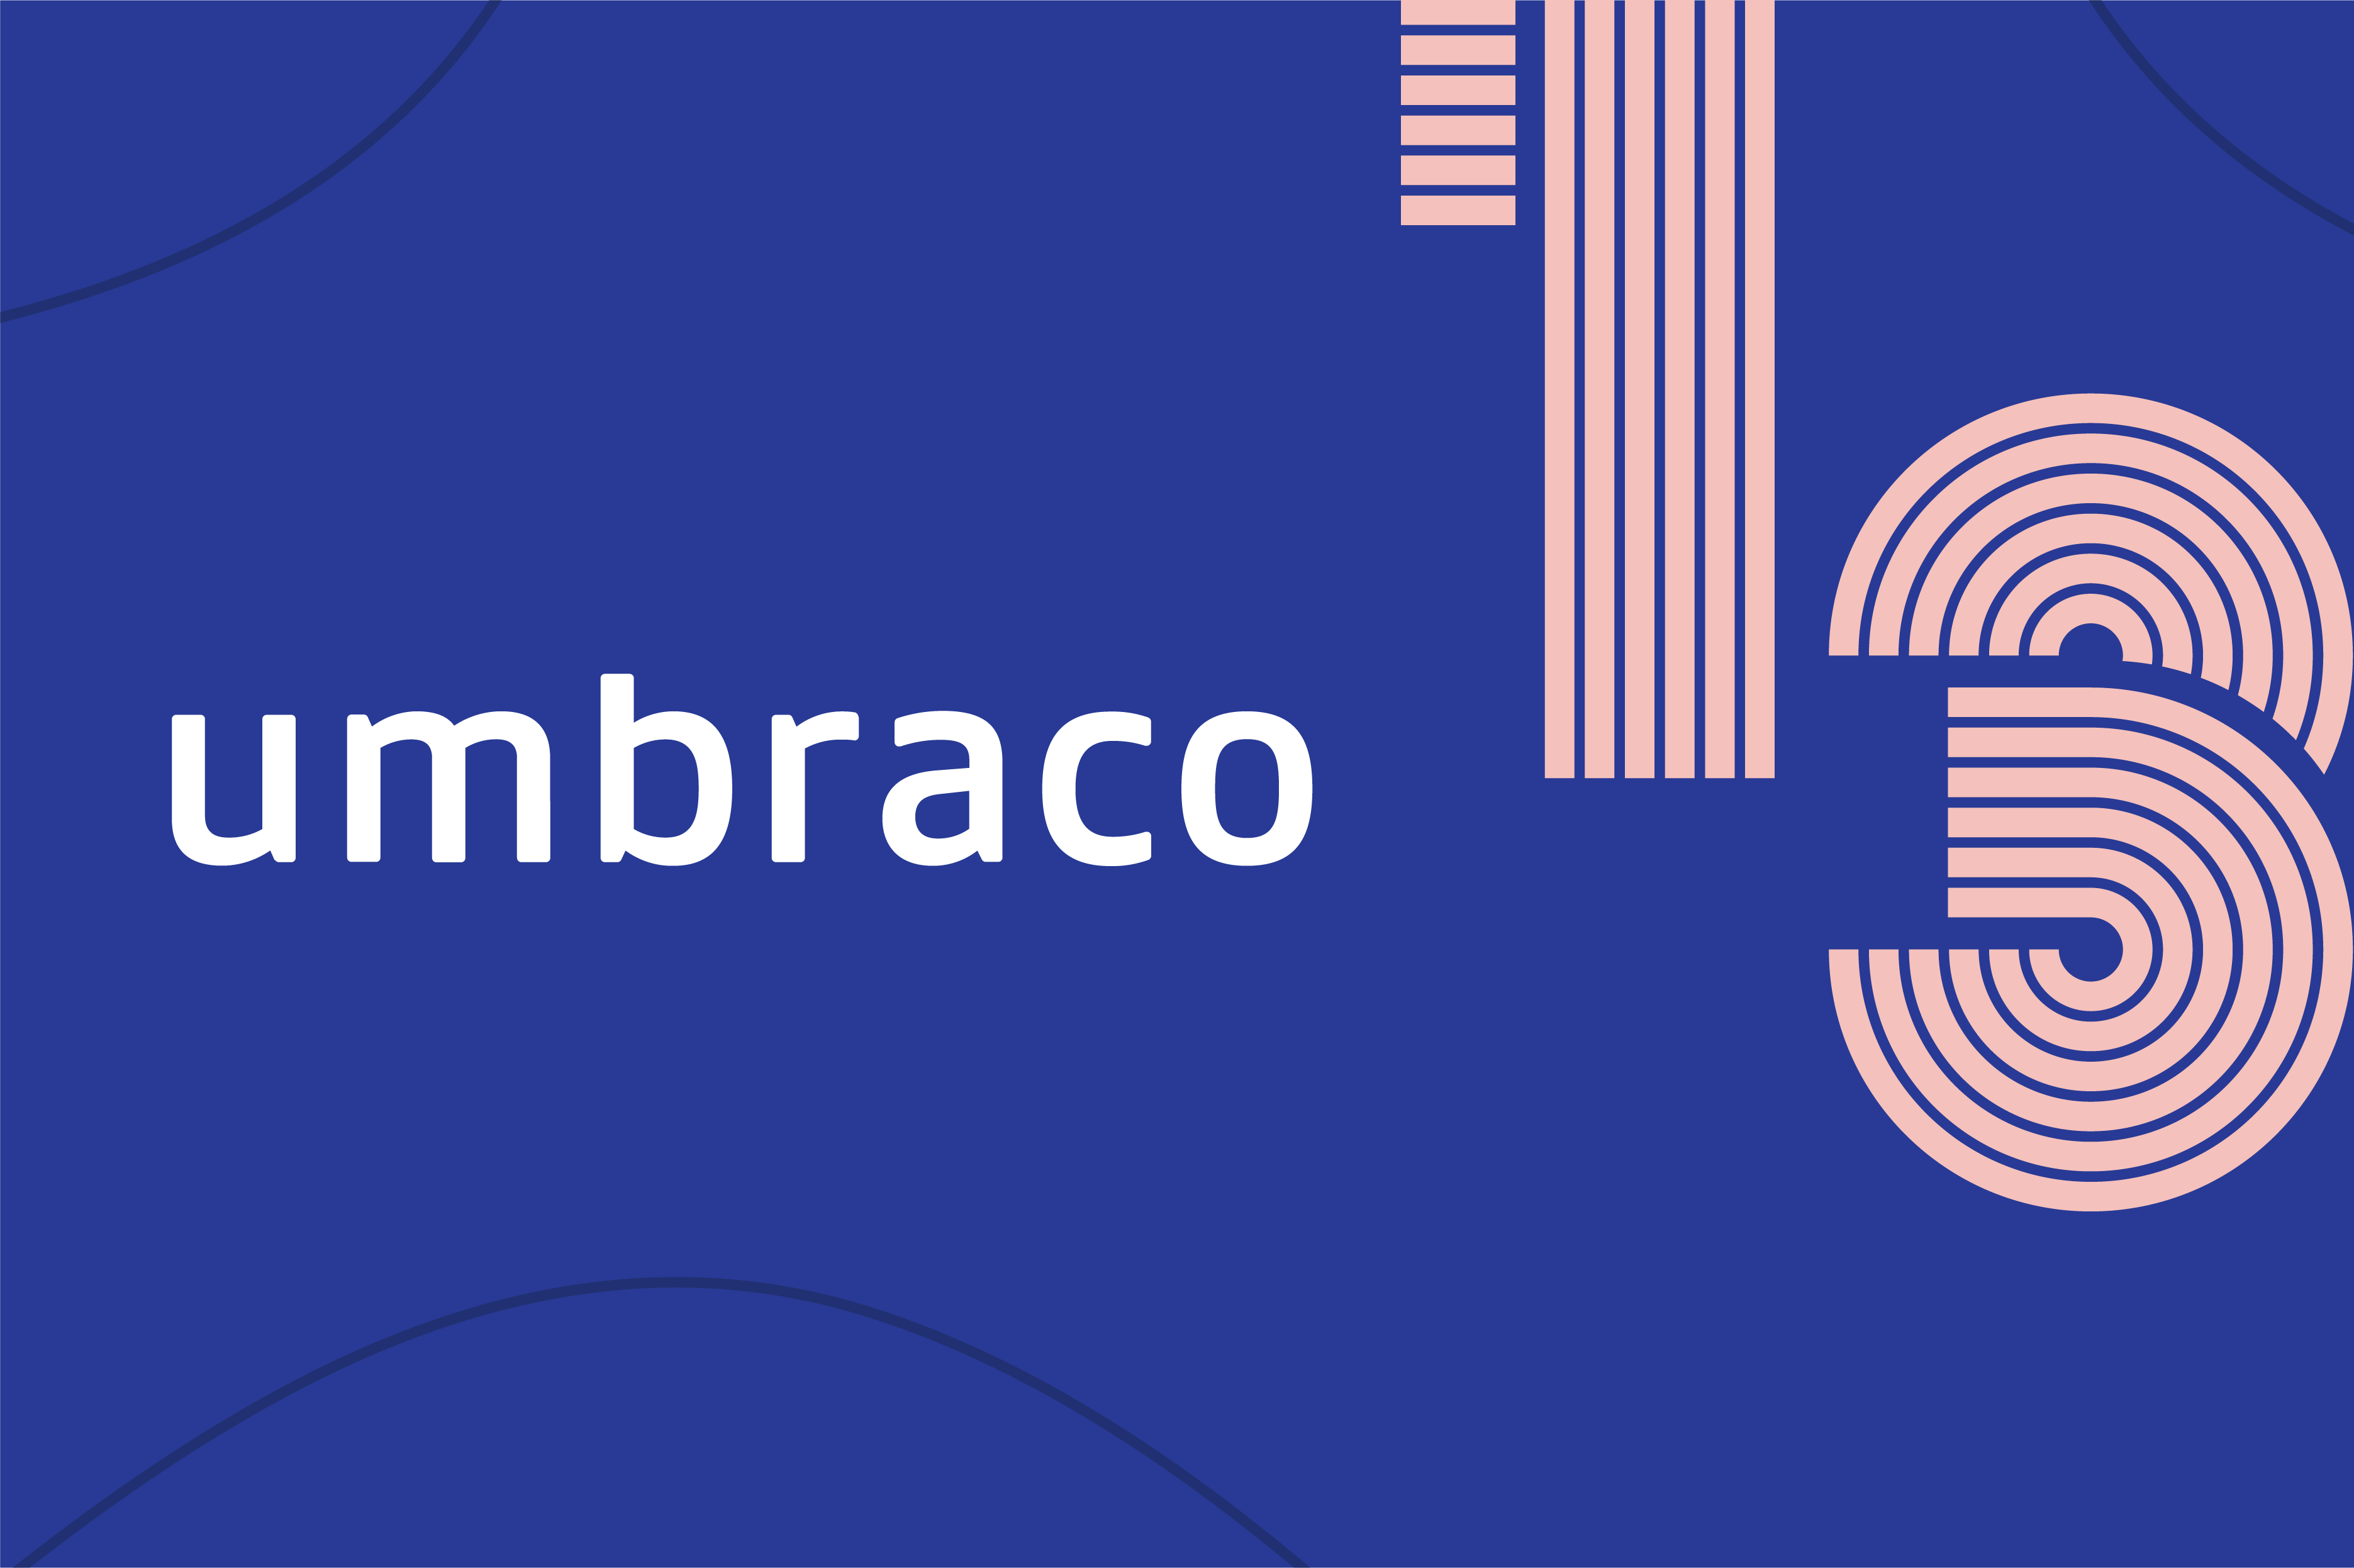 Umbraco logo with the number 13 against a blue background